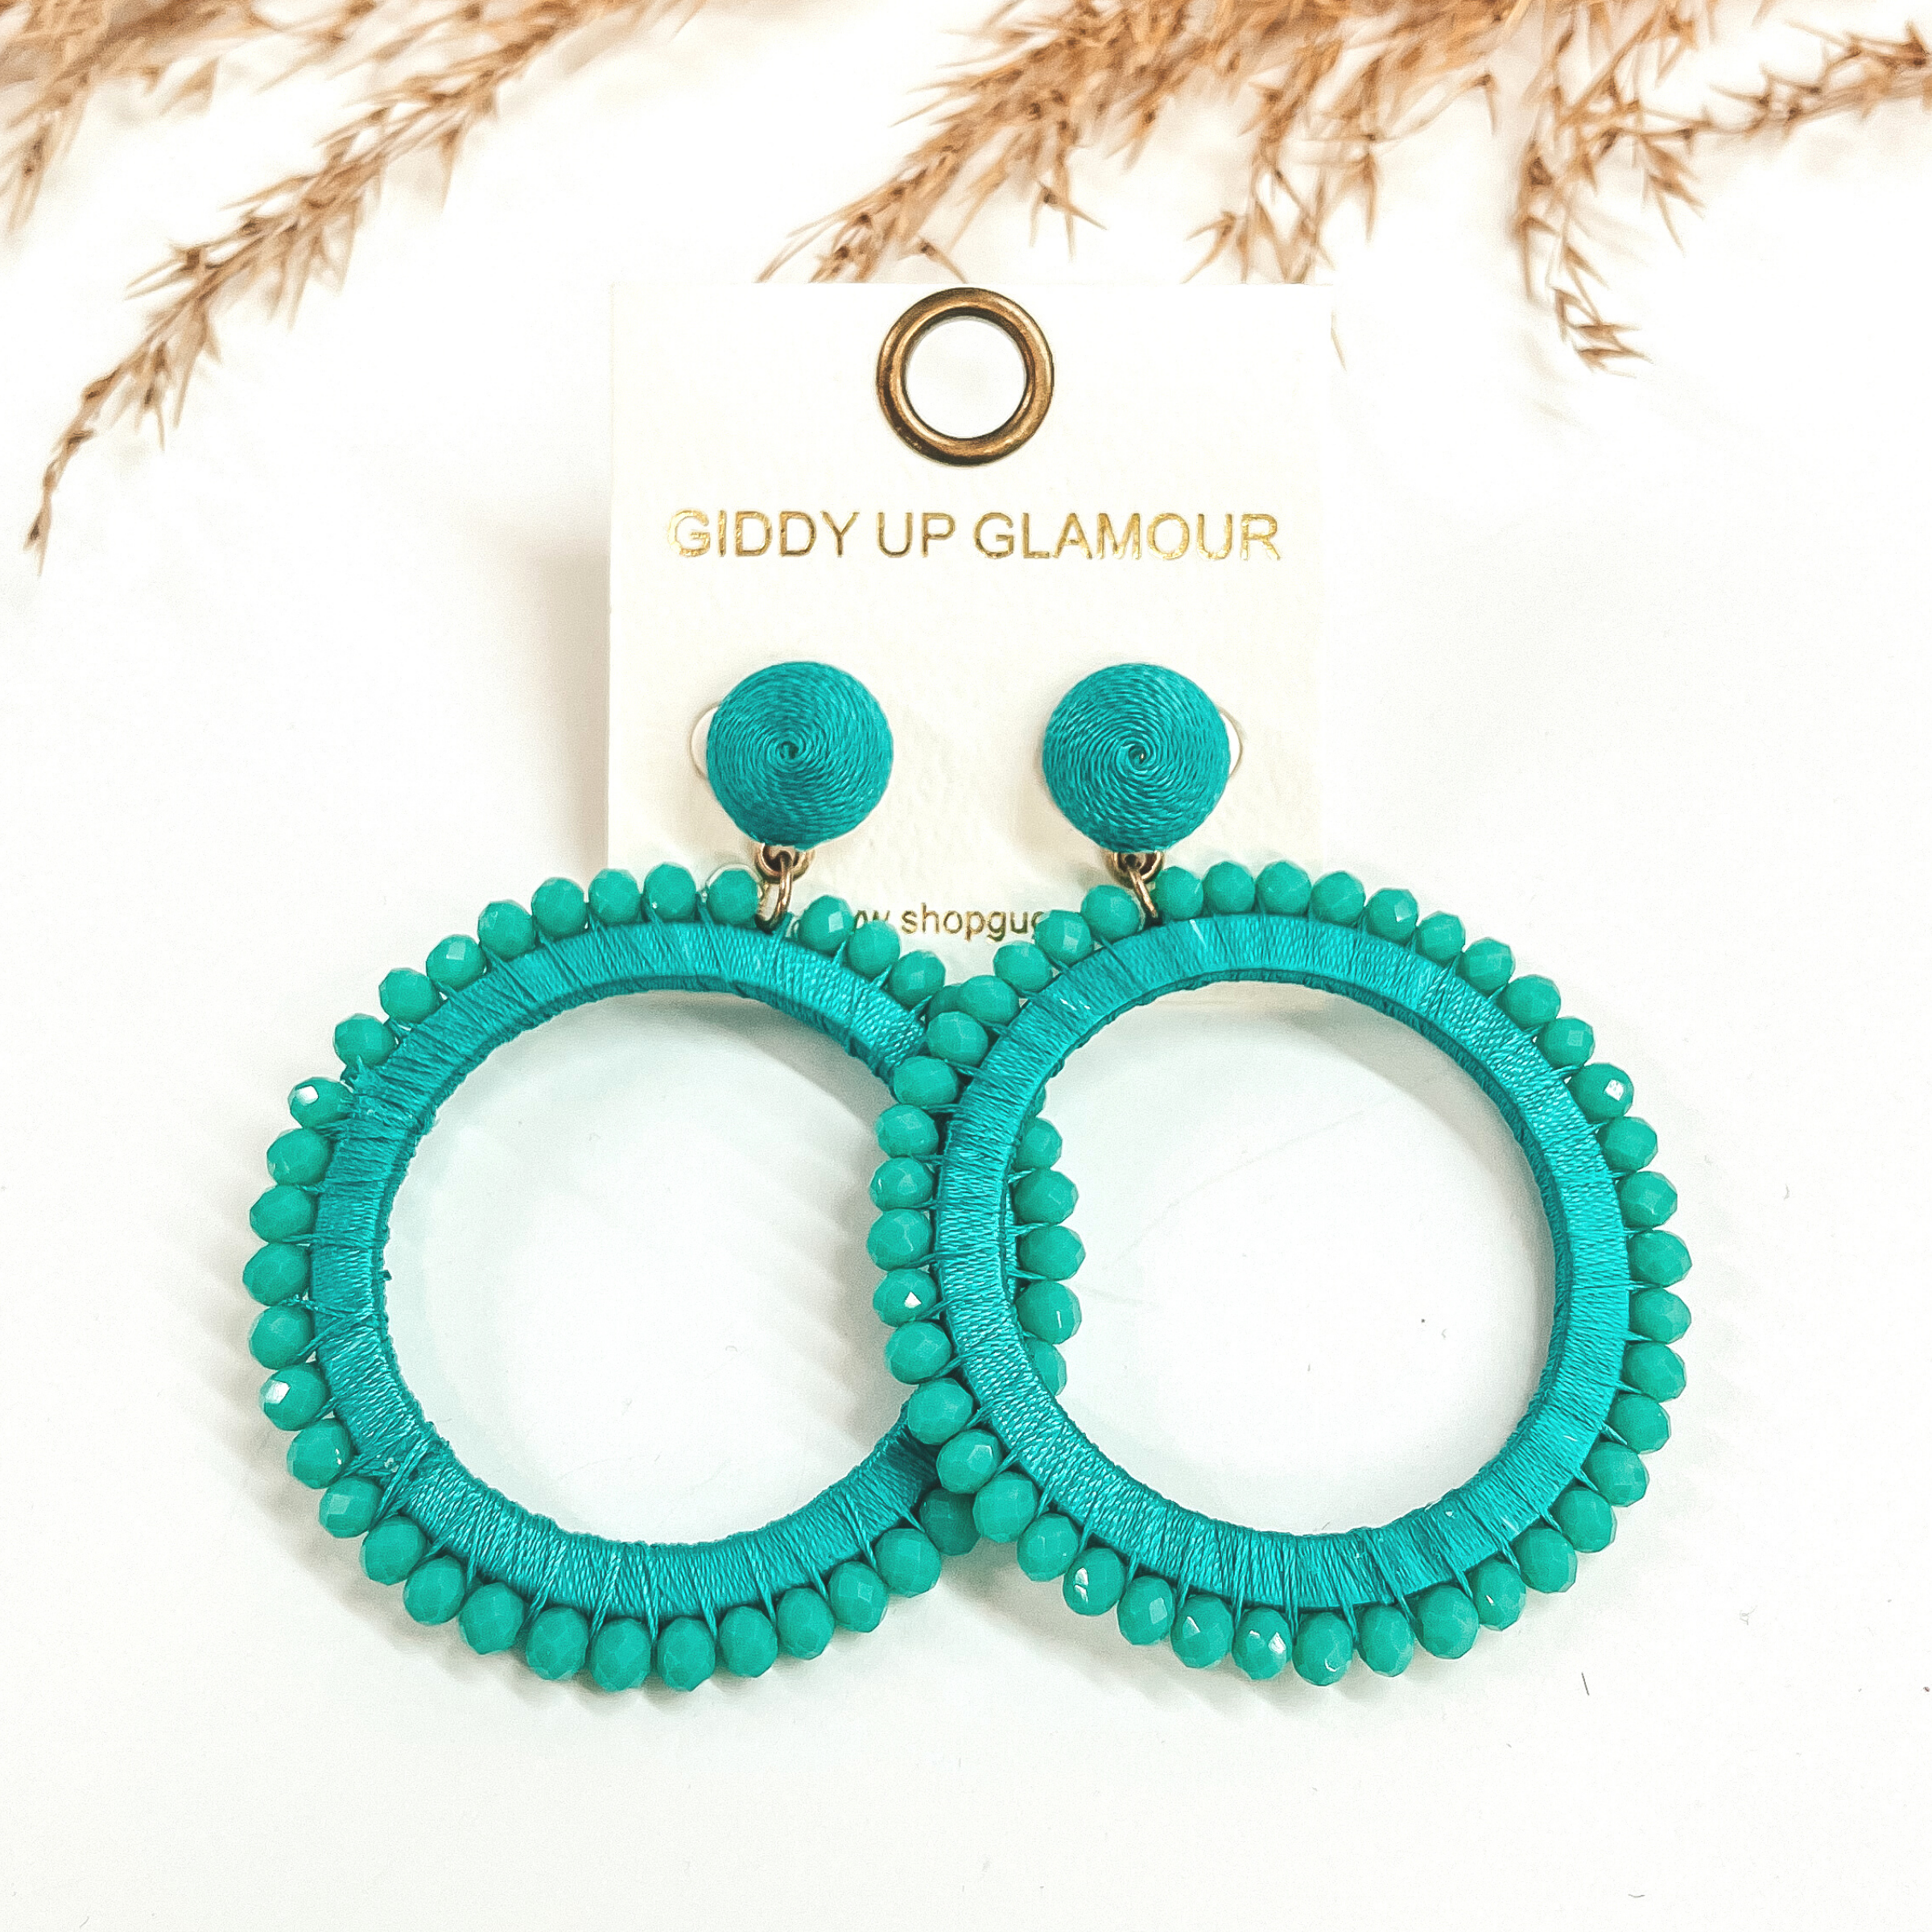 Turquoise post back circle drop earrings. Turquoise colored beads all around the circle and the circle is wrapped with turquoise colored thread.  Taken on a white background with a brown plant in the back as decor.